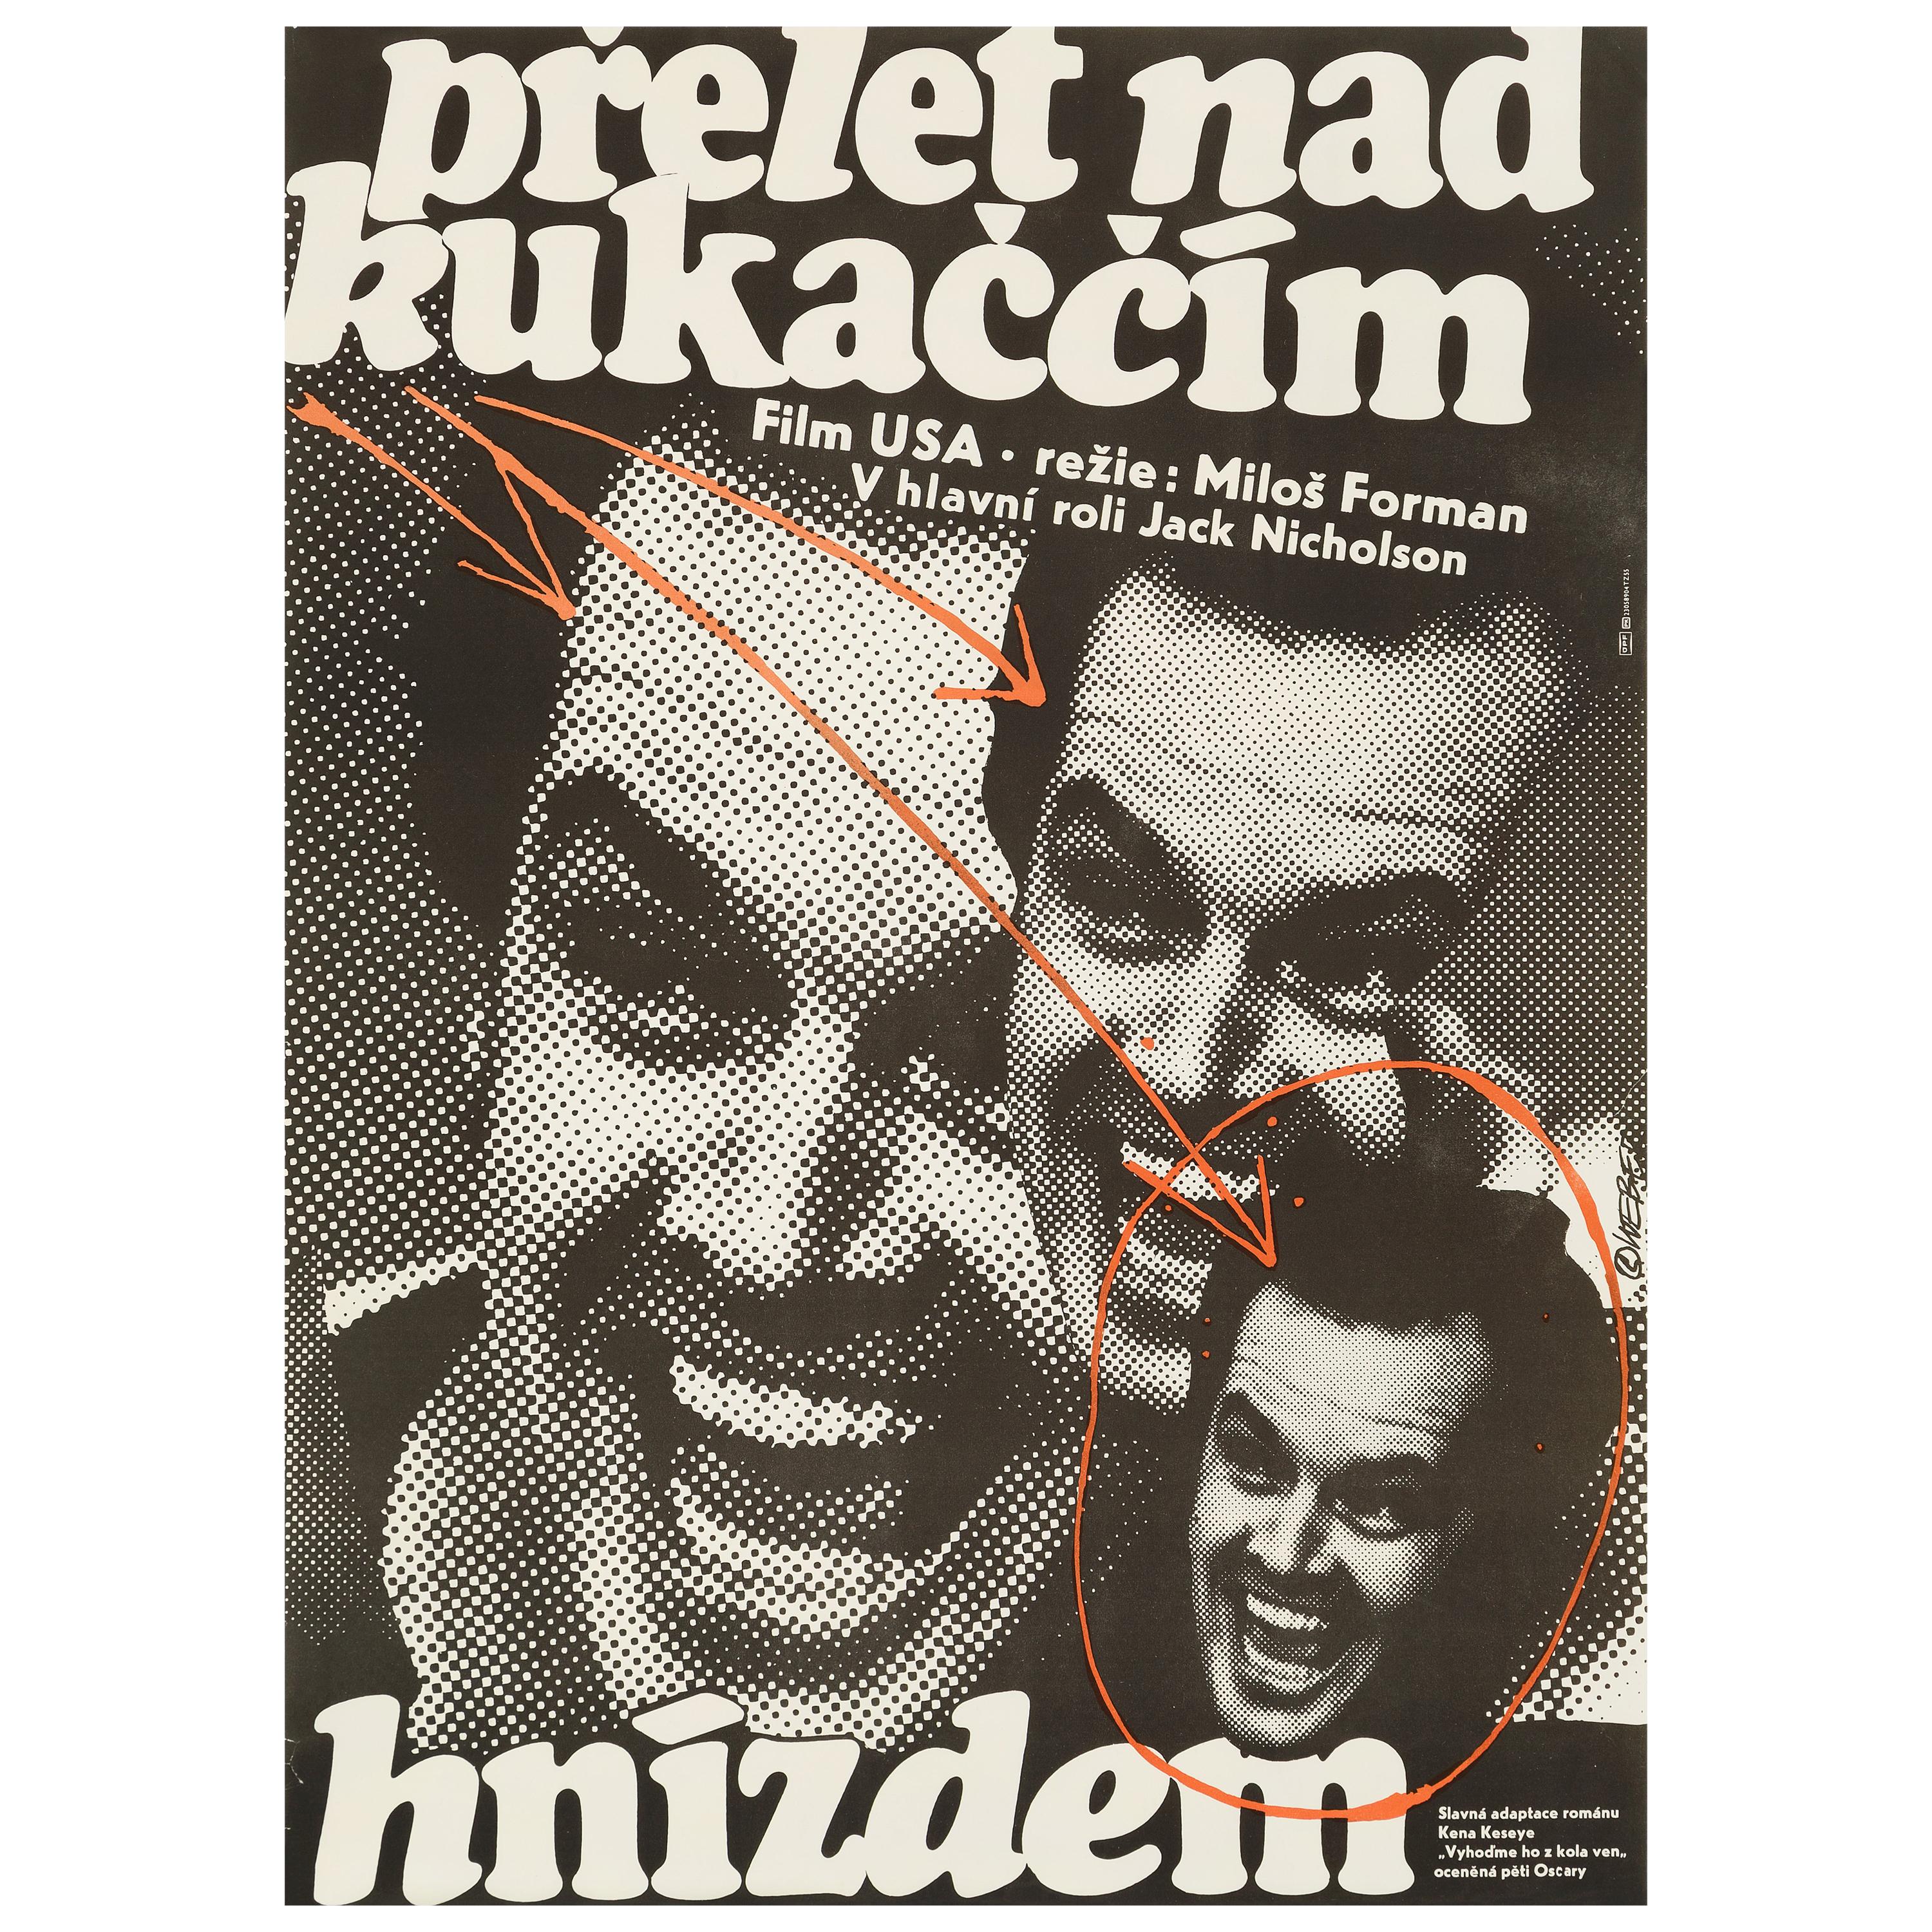 'One Flew Over the Cuckoo's Nest' Original Vintage Movie Poster, Czech, 1978